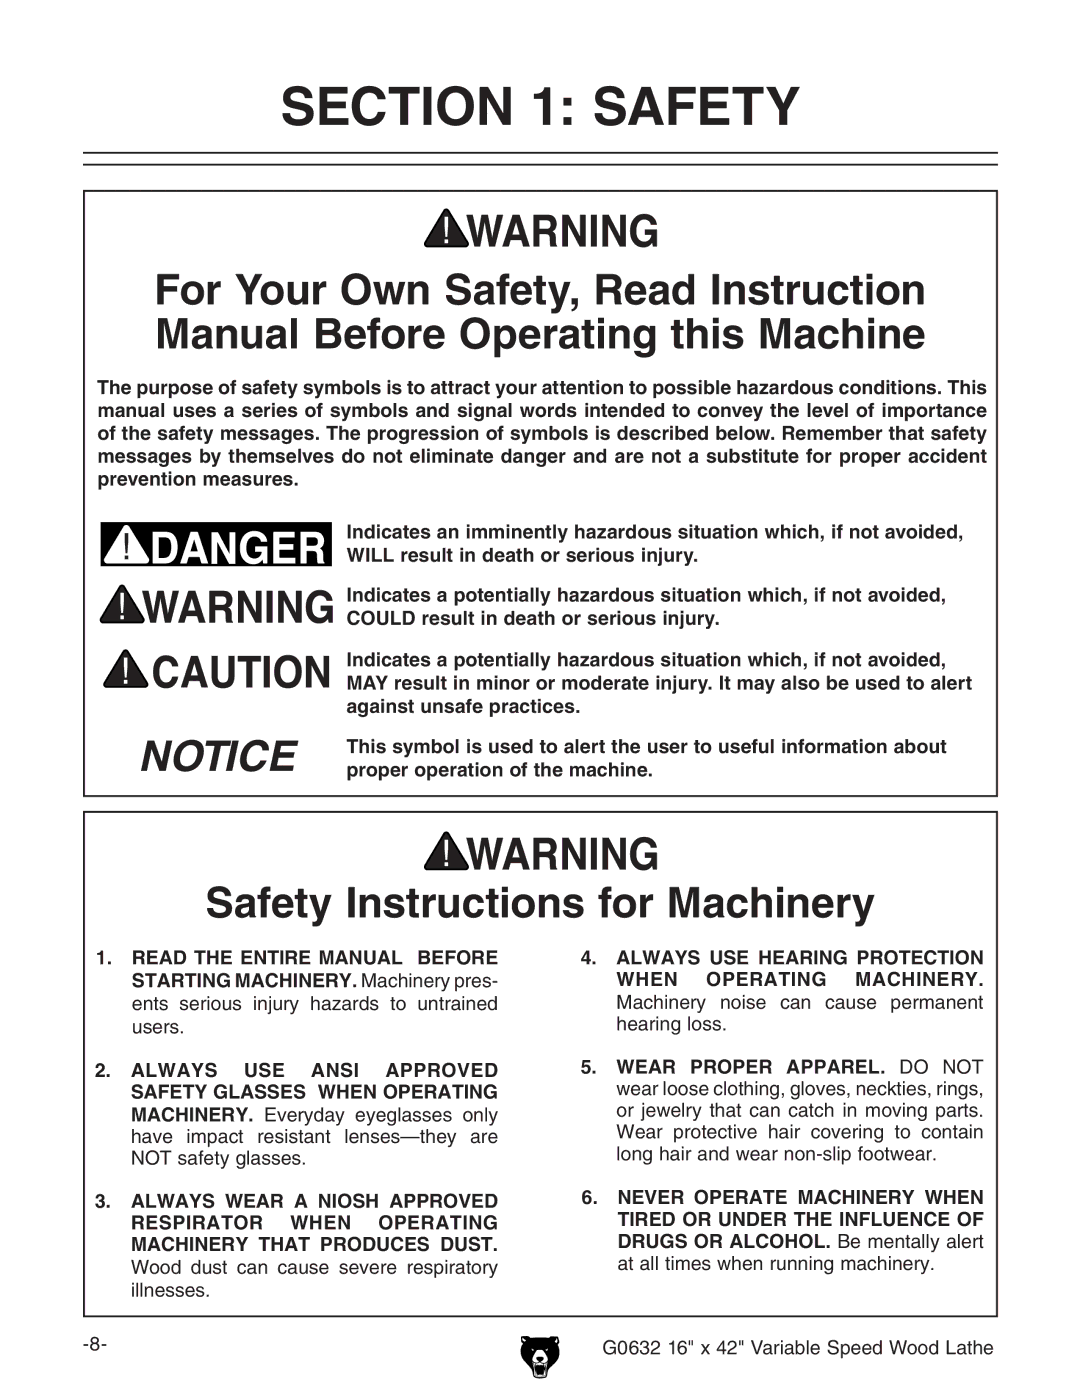 Grizzly owner manual G0632 16 x 42 Variable Speed Wood Lathe 